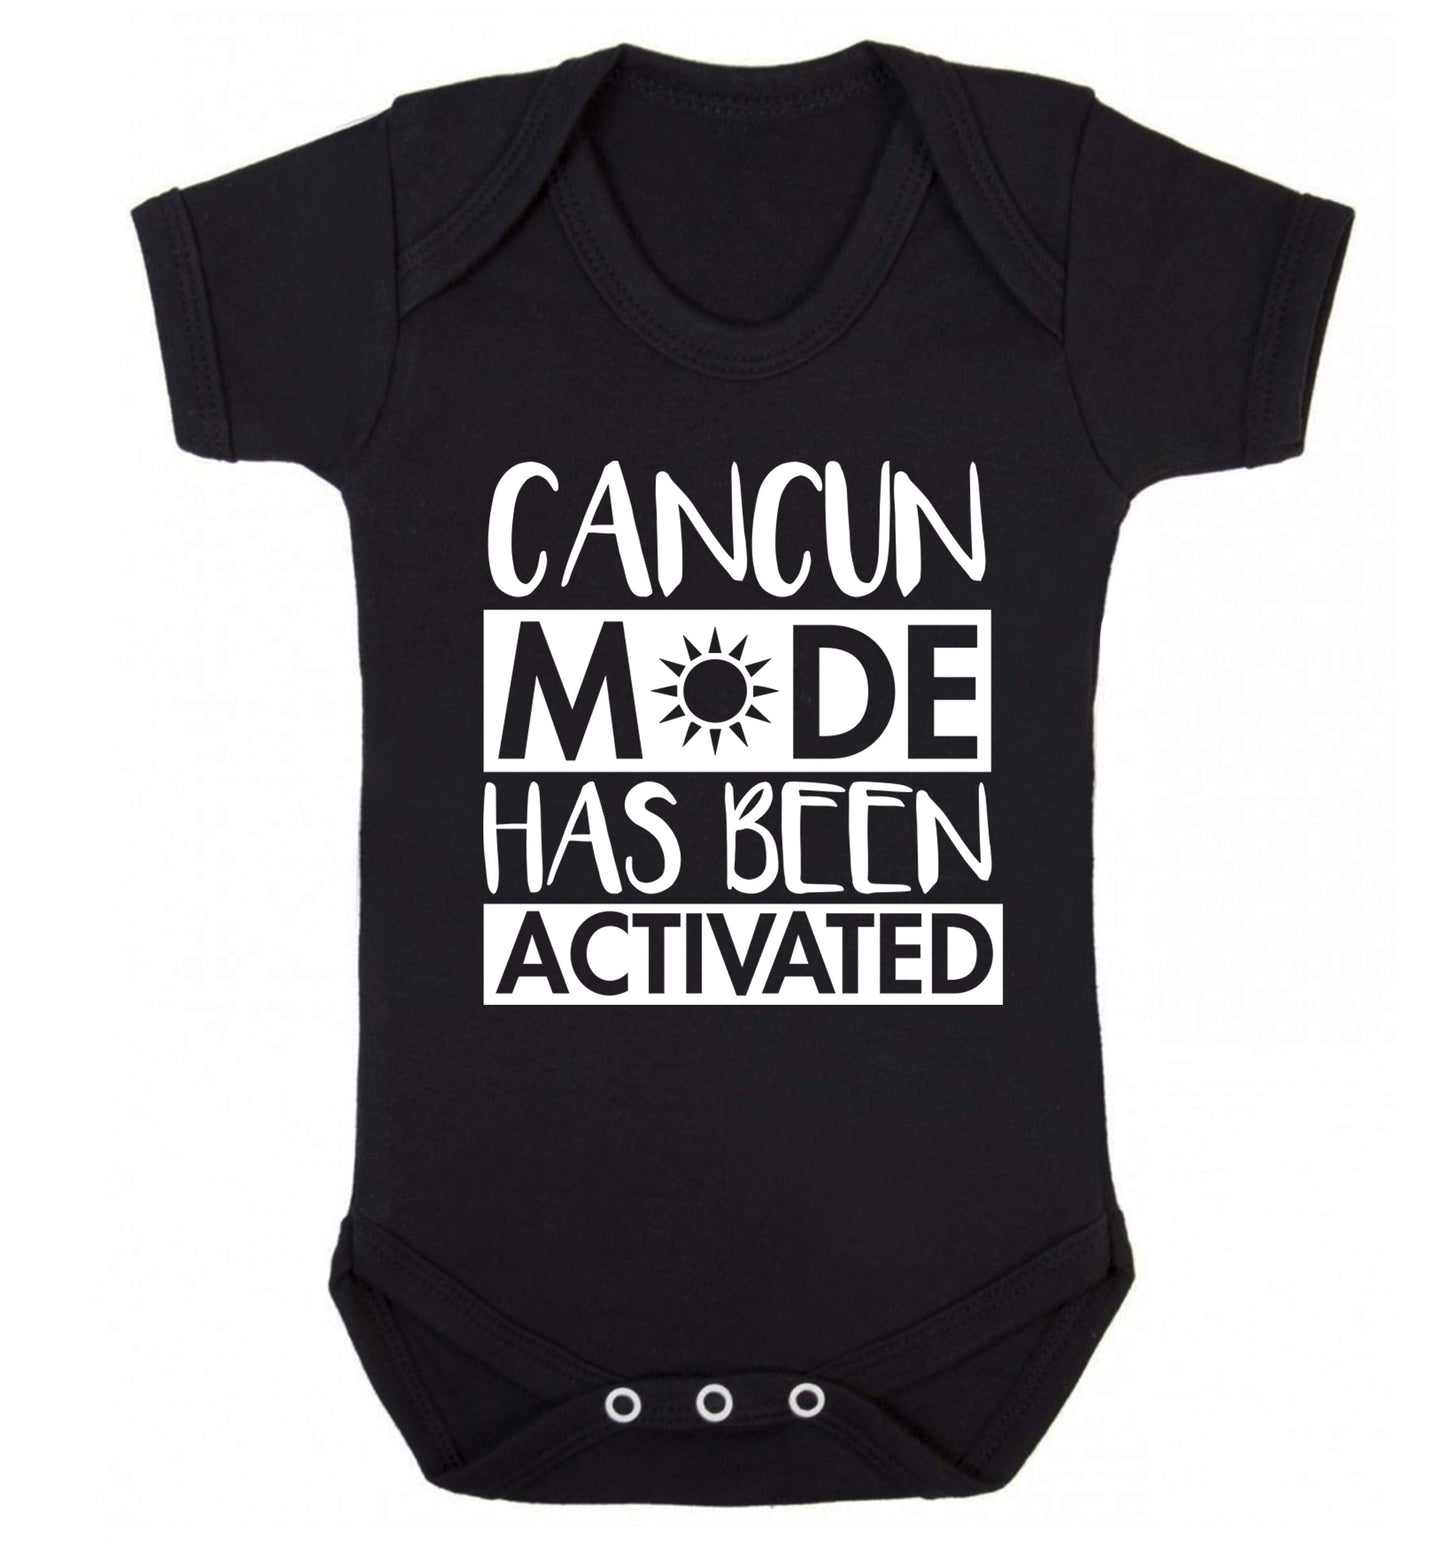 Cancun mode has been activated Baby Vest black 18-24 months